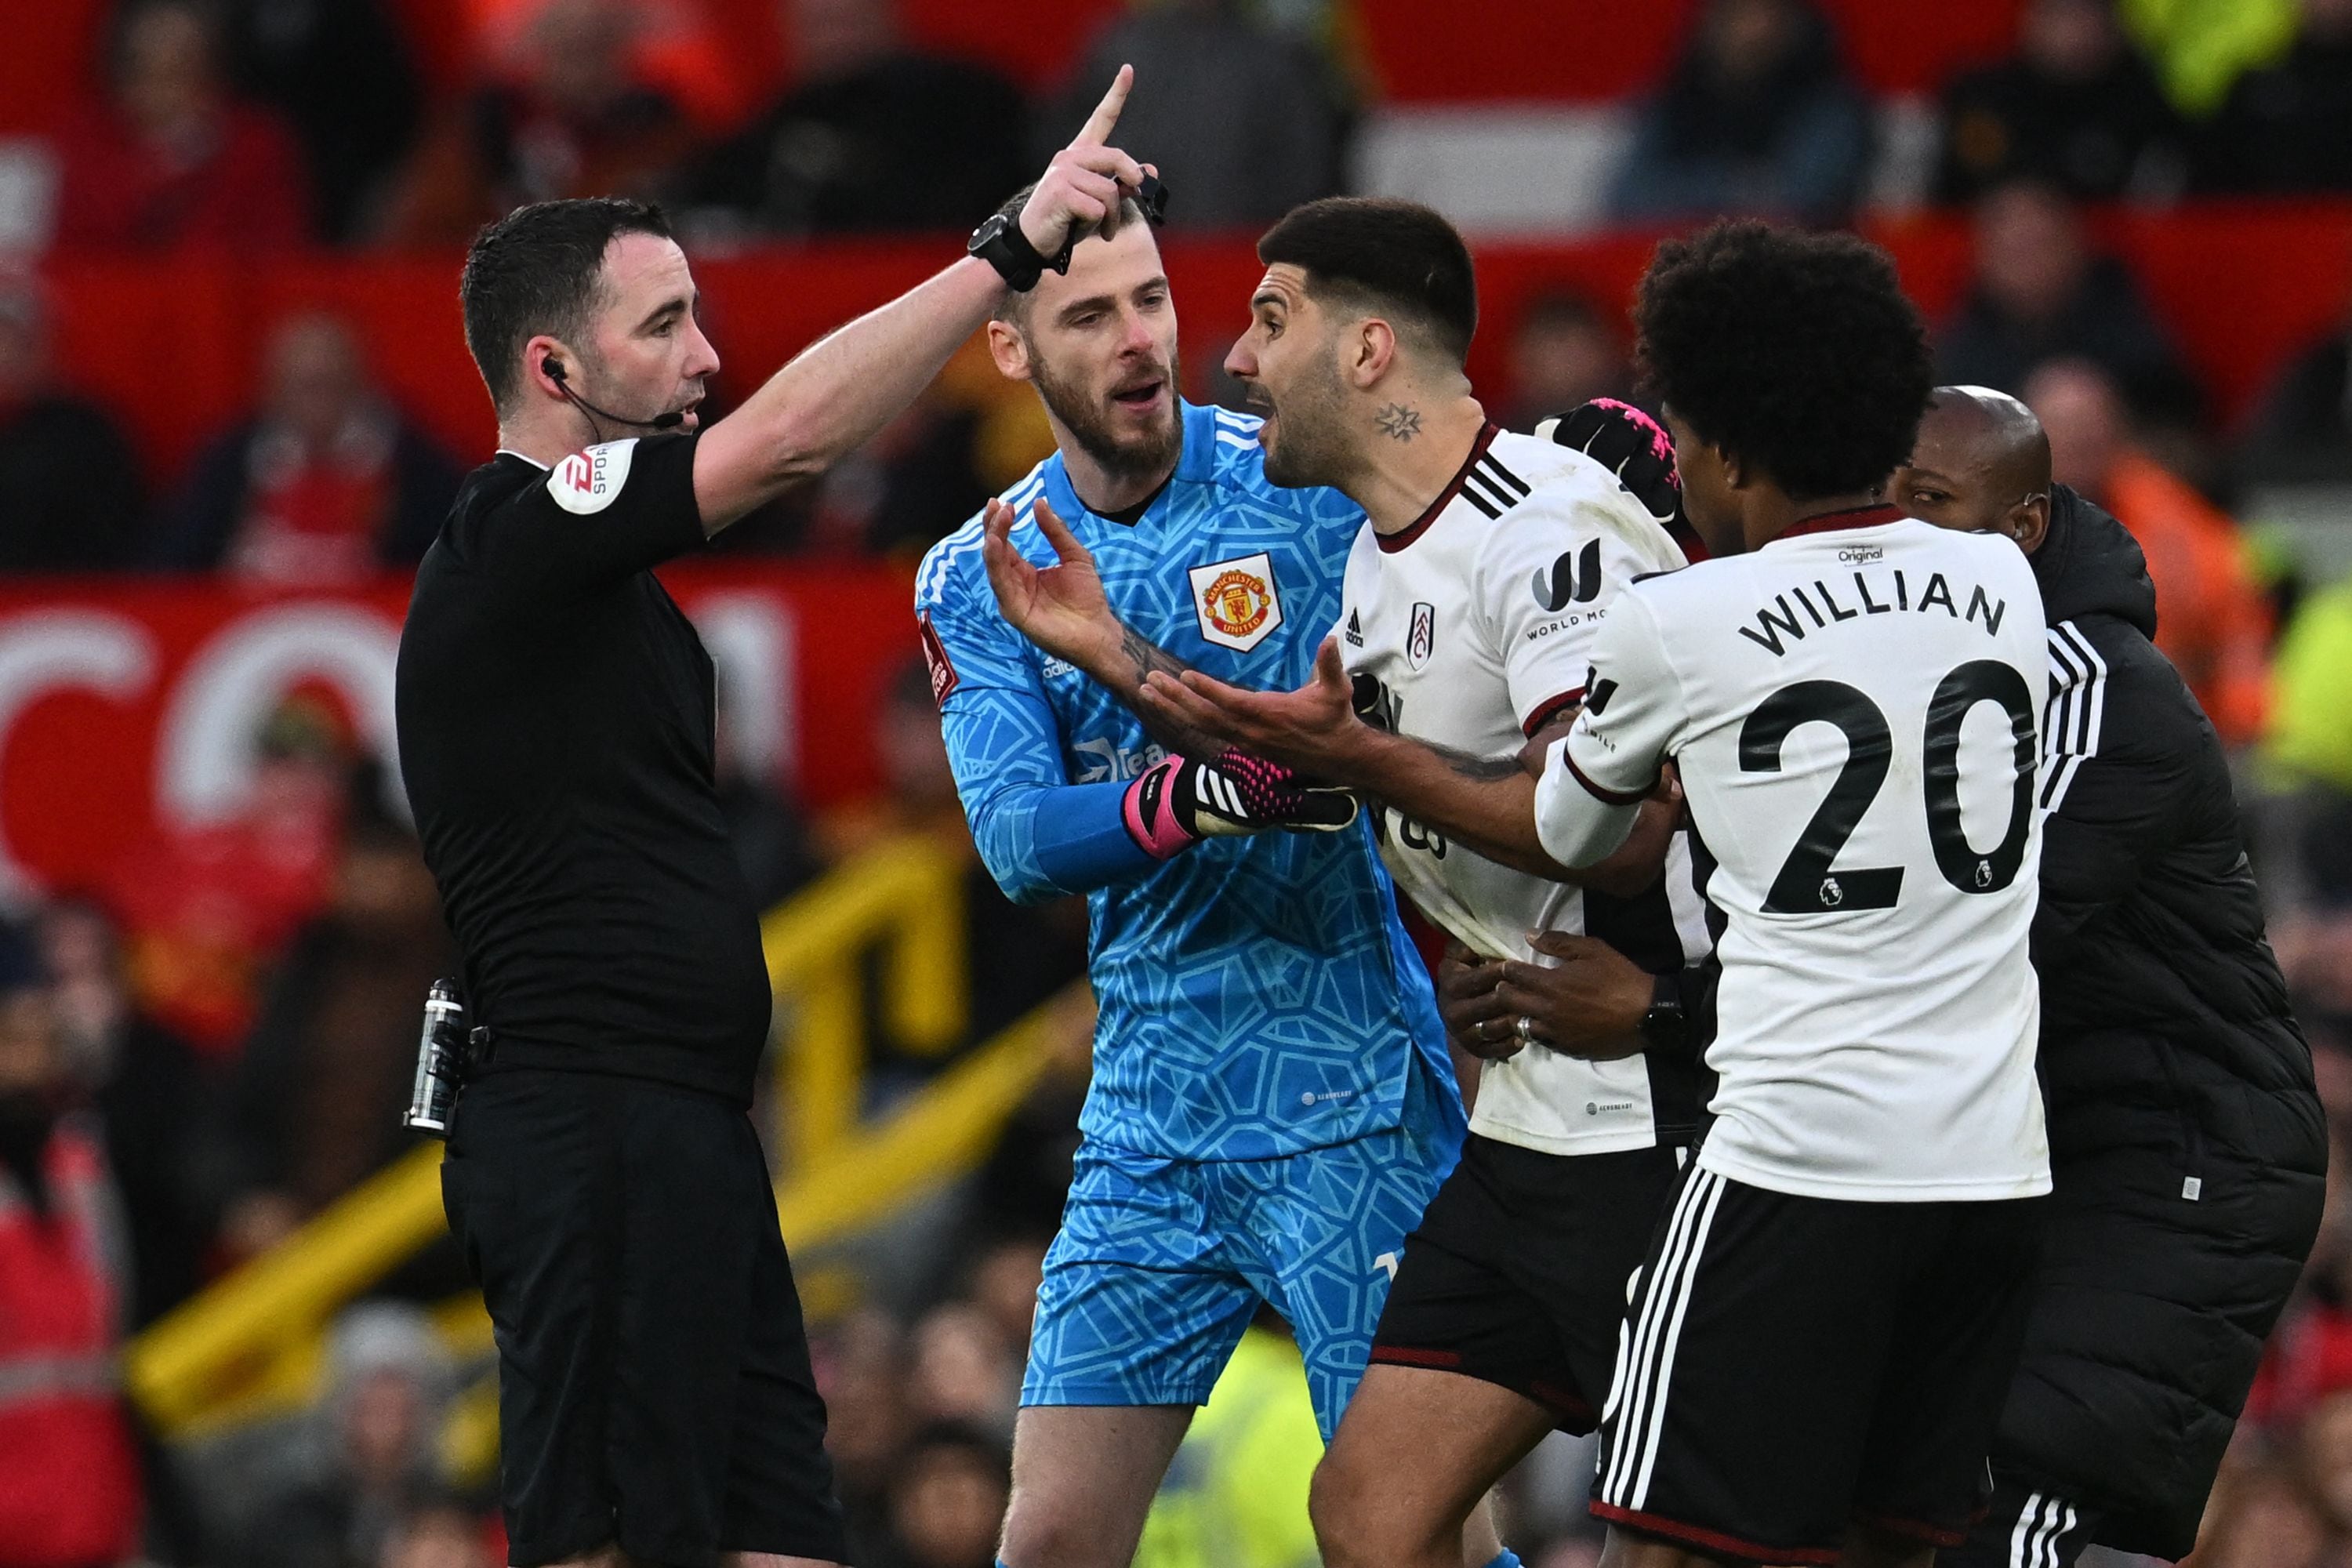 (FILES) In this file photo taken on March 19, 2023 Fulham's Serbian striker Aleksandar Mitrovic (C) is restrained by Manchester United's Spanish goalkeeper David de Gea (2L), Fulham's Brazilian midfielder Willian (2R) and Fulham's assistant coach Luis Boa Morte (R) after being shown a red card by English referee Chris Kavanagh (L) during the English FA Cup quarter-final football match between Manchester United and Fulham at Old Trafford in Manchester, north-west England. - Aleksandar Mitrovic has received an eight-match ban following his sending-off in the club's FA Cup tie against Manchester United, the Football Association has announced, April 4. (Photo by Paul ELLIS / AFP) / RESTRICTED TO EDITORIAL USE. No use with unauthorized audio, video, data, fixture lists, club/league logos or 'live' services. Online in-match use limited to 120 images. An additional 40 images may be used in extra time. No video emulation. Social media in-match use limited to 120 images. An additional 40 images may be used in extra time. No use in betting publications, games or single club/league/player publications. / 